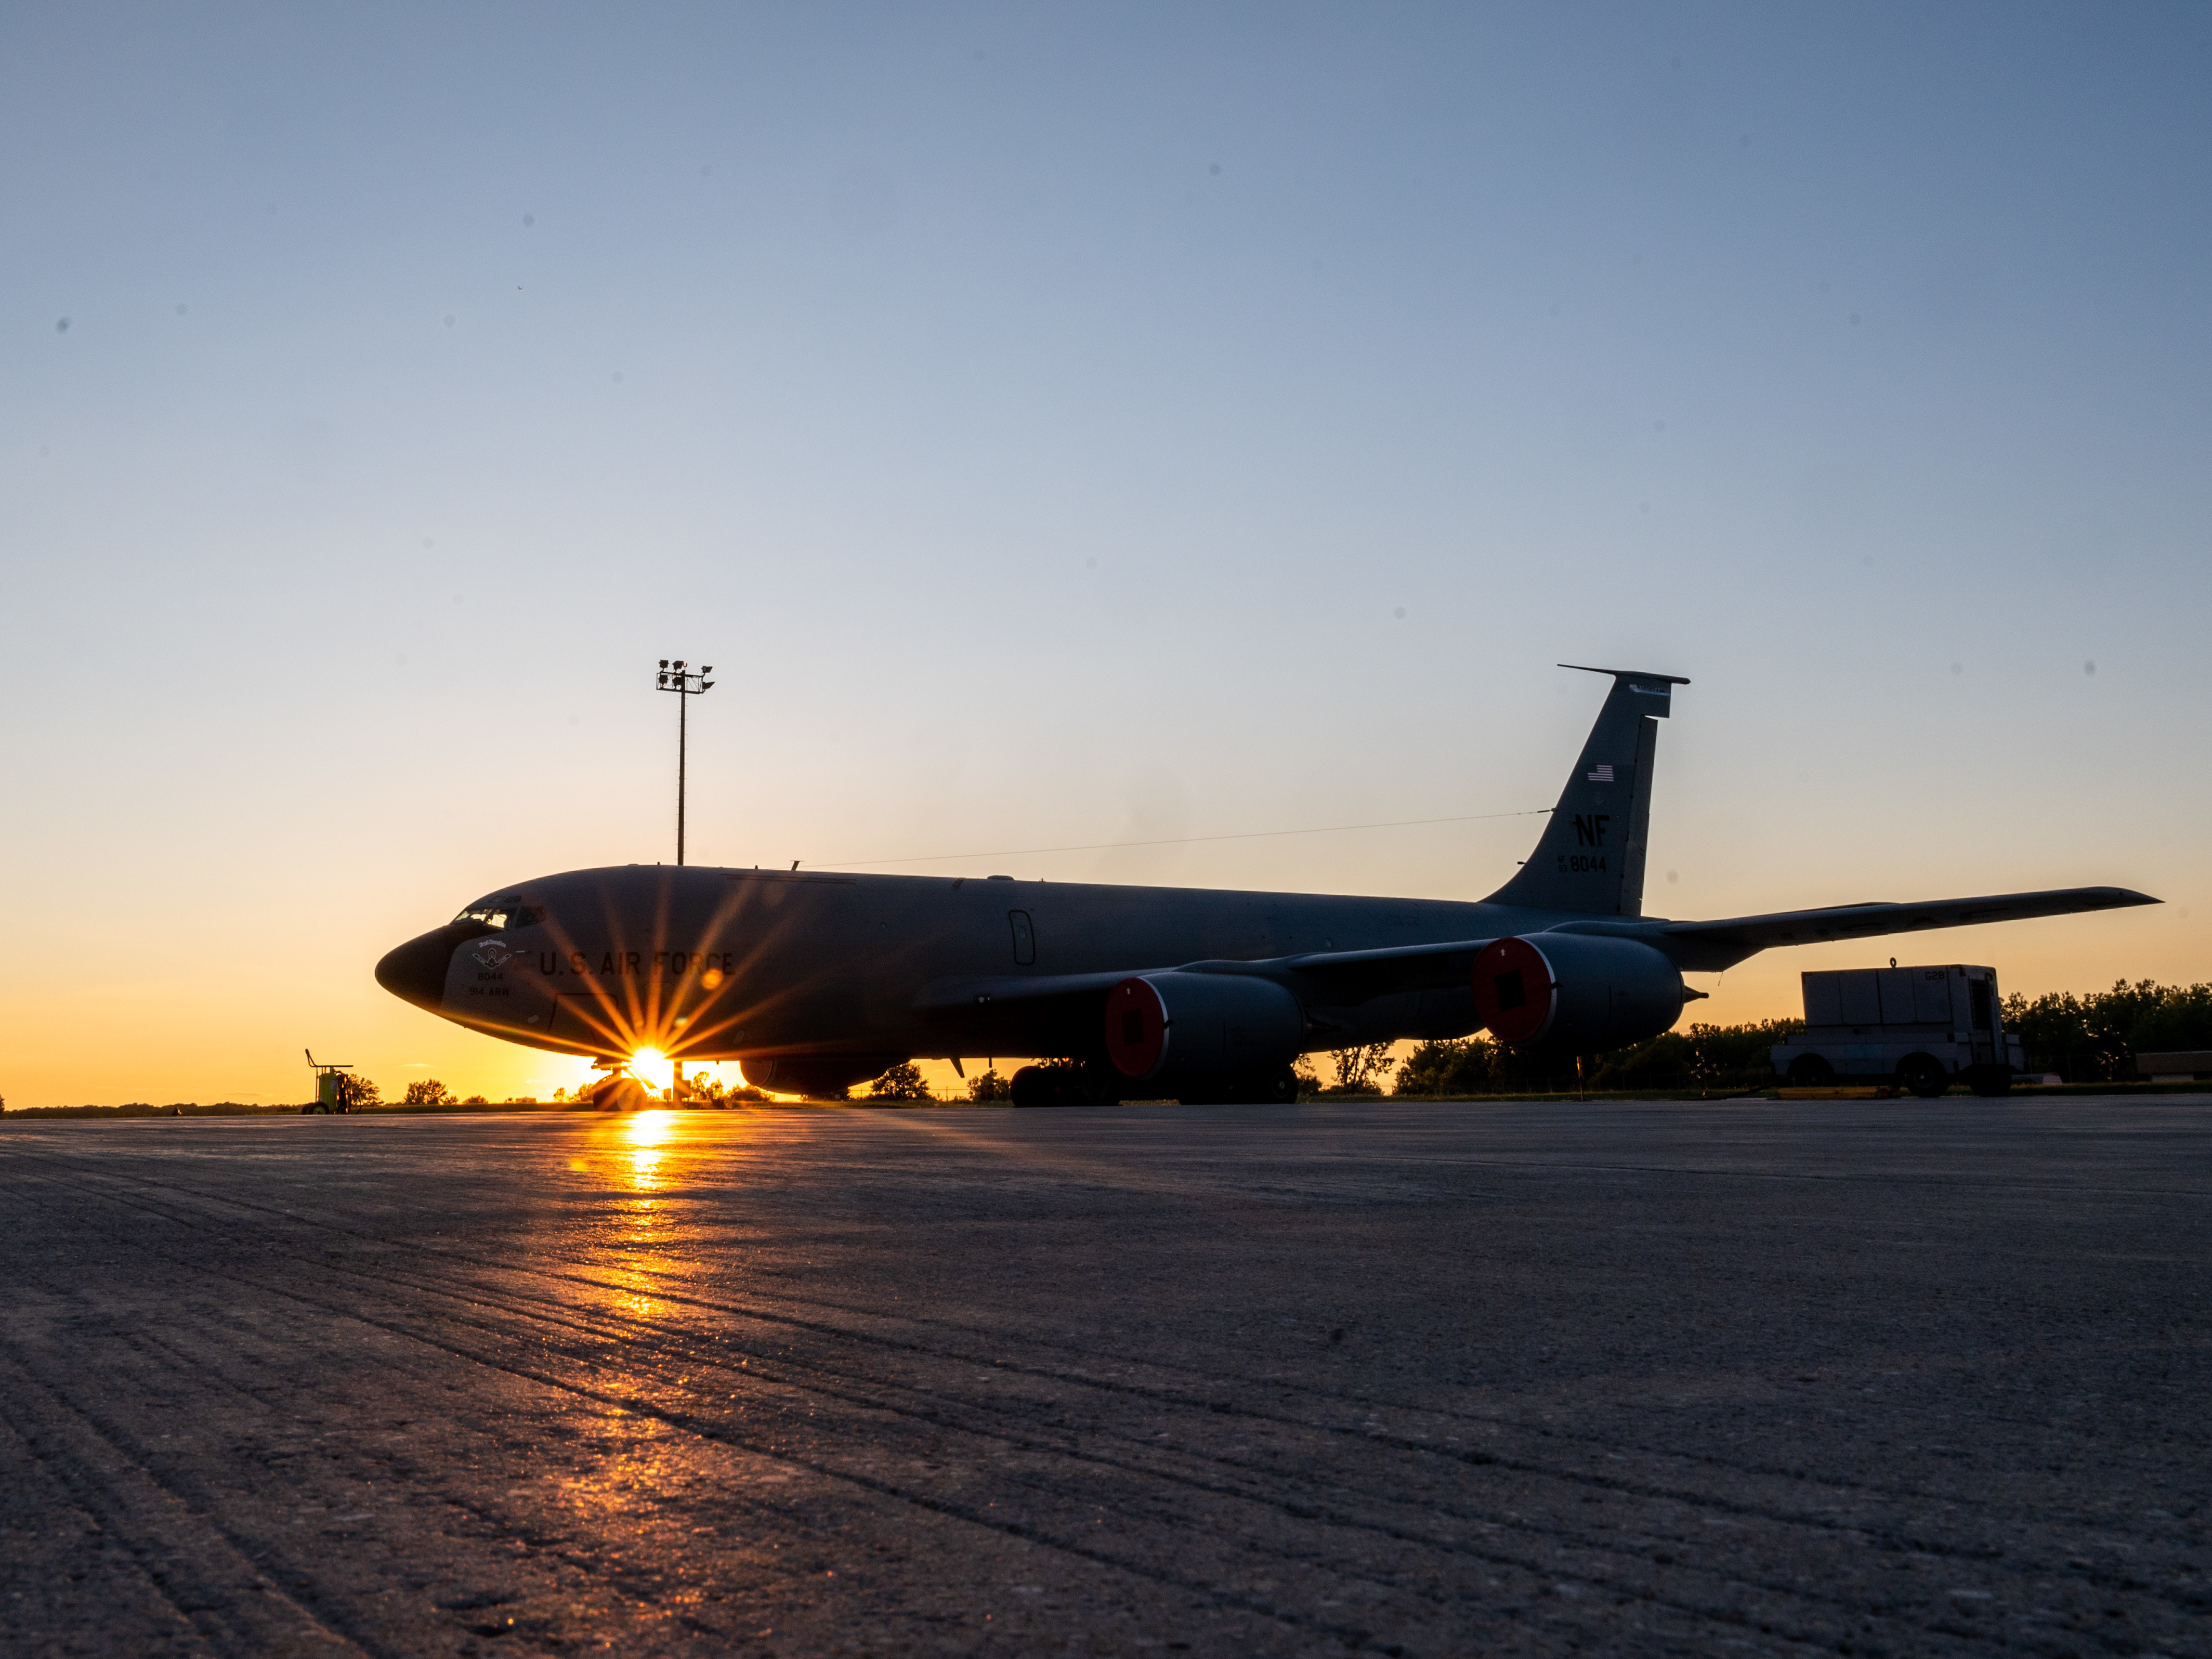 A U.S. Air Force KC-135 Stratotanker with the 914th Air Refueling Wing, New York, is parked on the flightline August 2, 2022 at Niagara Falls Air Reserve Station, New York. The 914th ARW were assigned eight Stratotankers in 2017.  Prior to that, they were assigned C-130 Hercules, which provided airlift capabilities. (U.S. Air Force photo by Staff Sgt. Tiffany A. Emery)